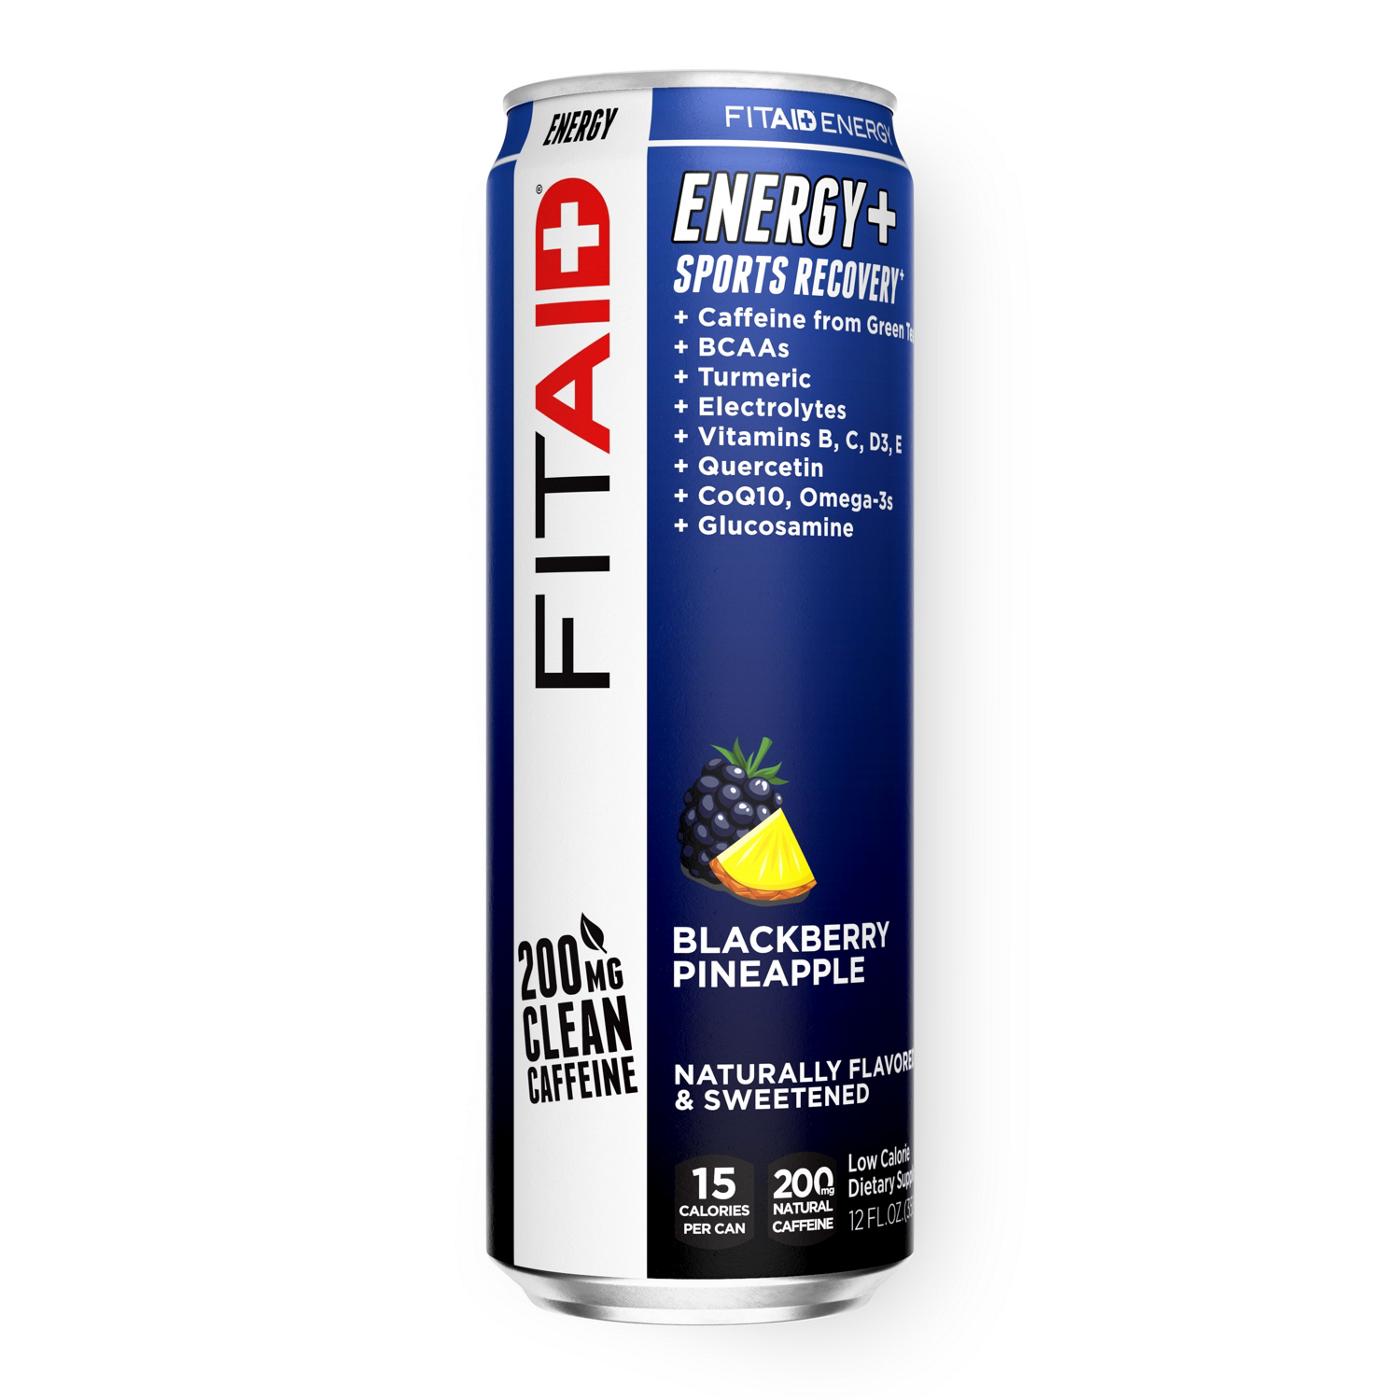 LIFEAID FITAID Energy+ Recovery Supplement Beverage - Blackberry Pineapple  - Shop Sports & Energy Drinks at H-E-B